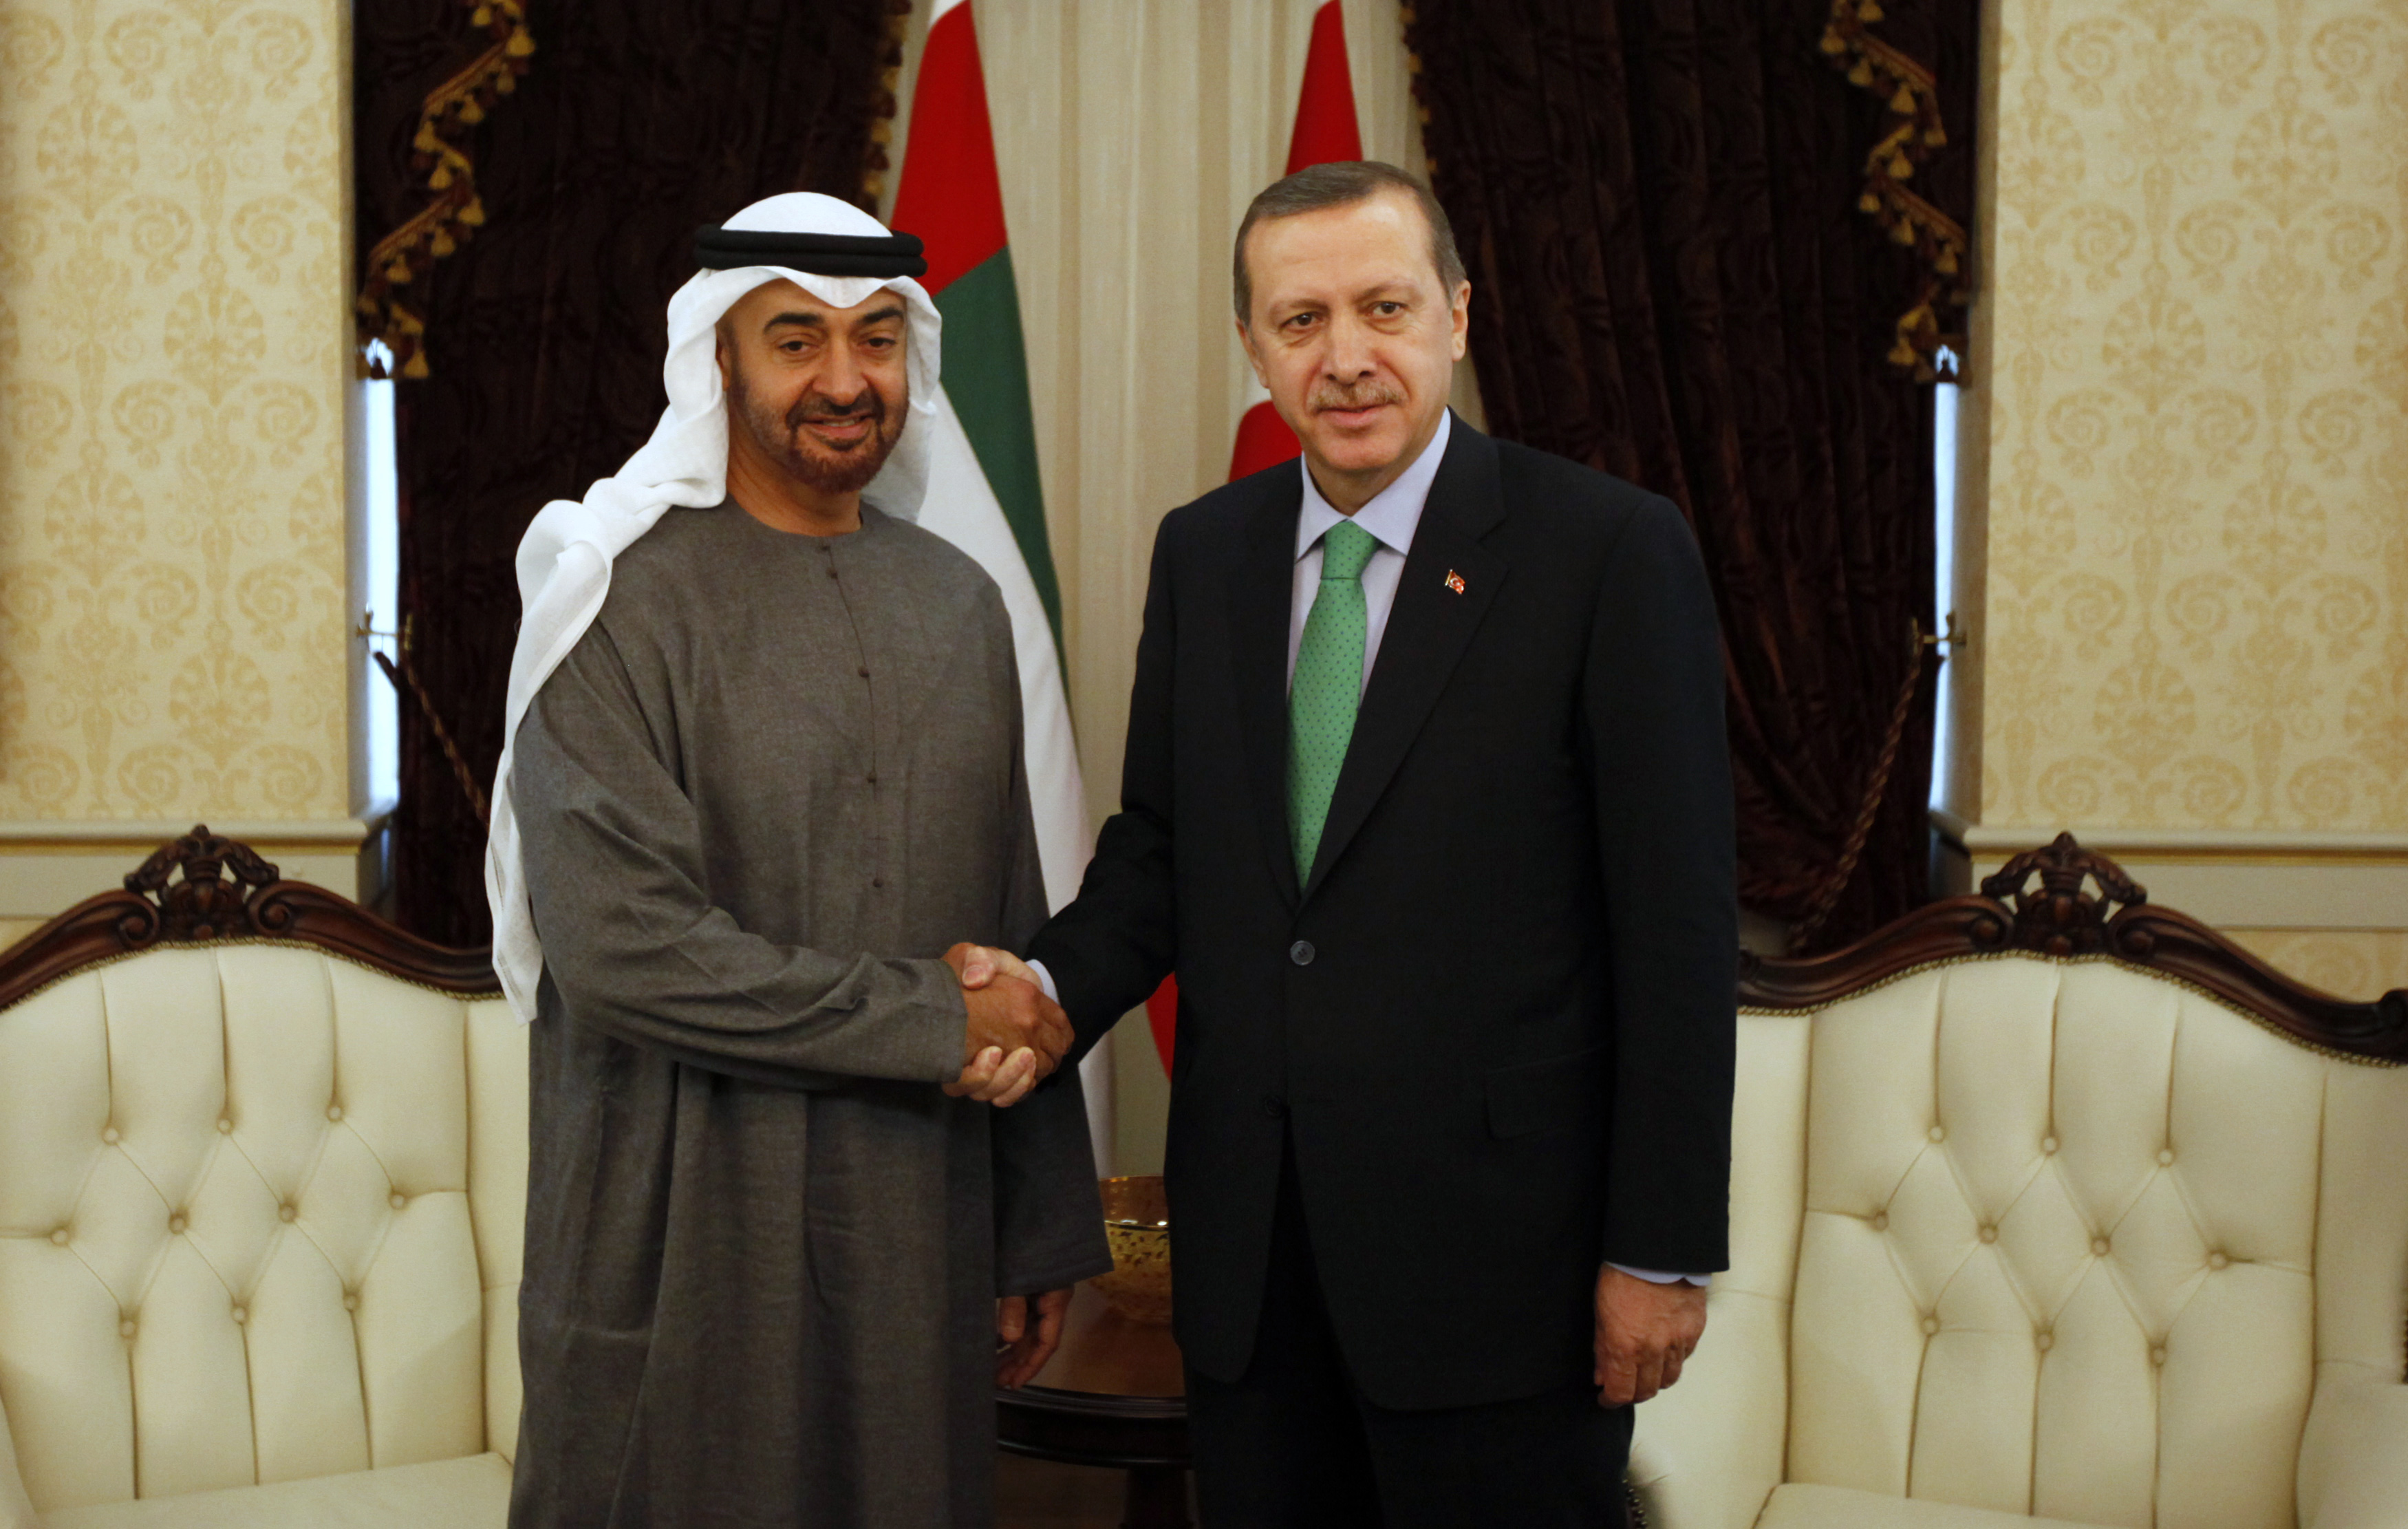 Abu Dhabi's Crown Prince Sheikh Mohammed shakes hands with Turkey's PM Erdogan before a meeting in Ankara